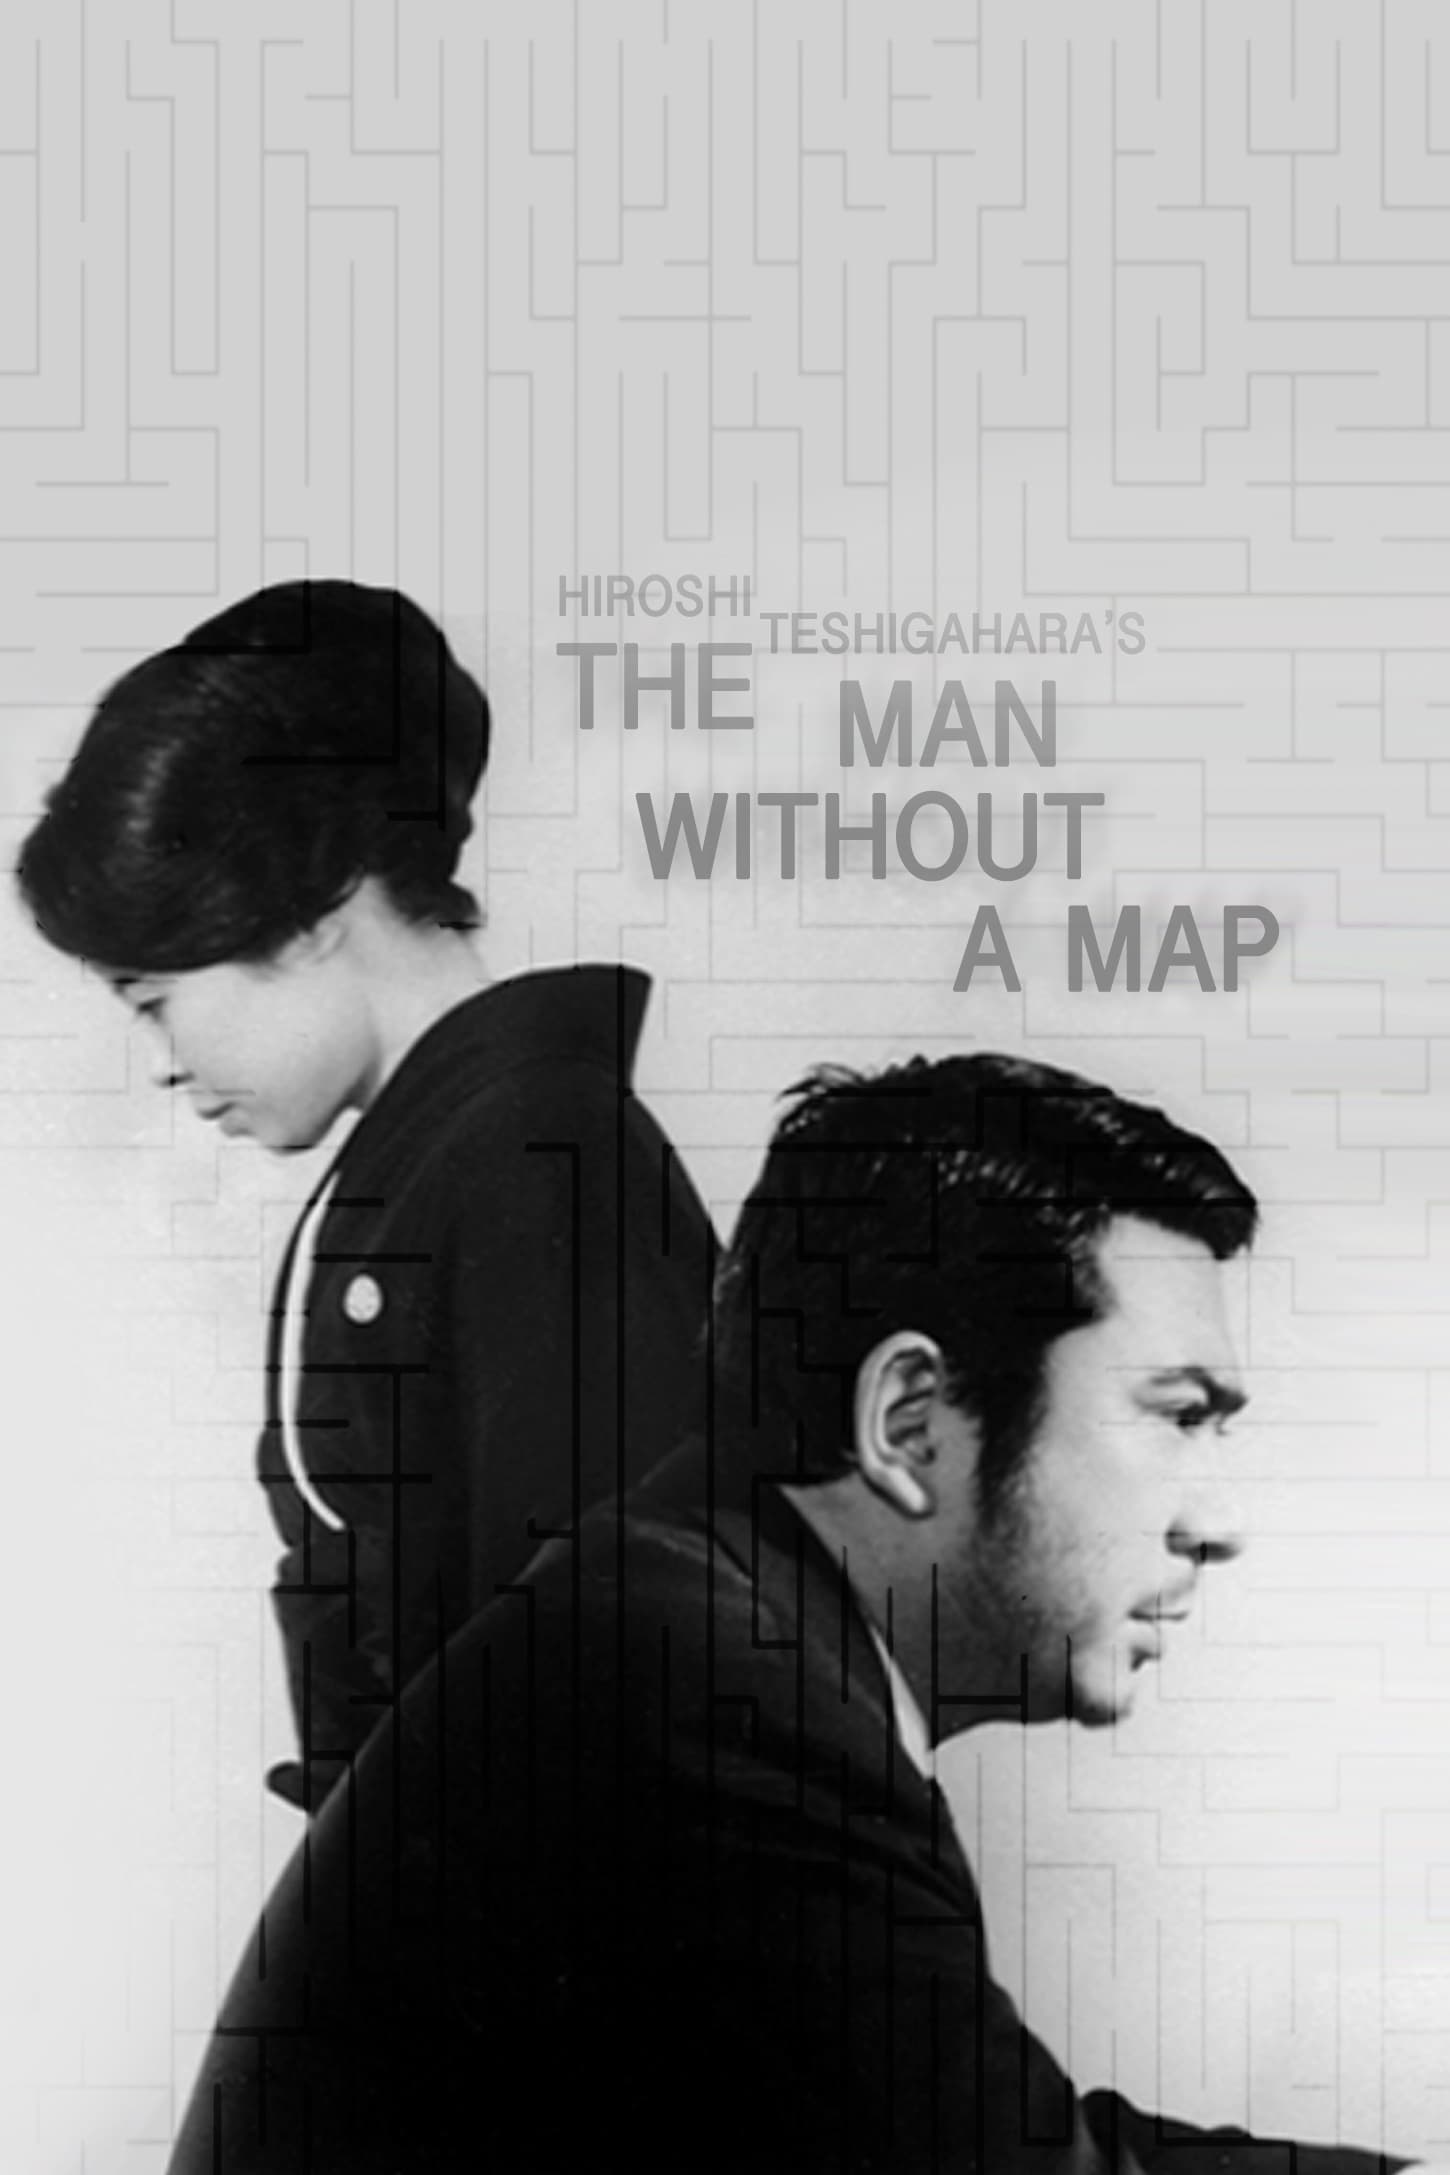 The Man Without a Map (1968)